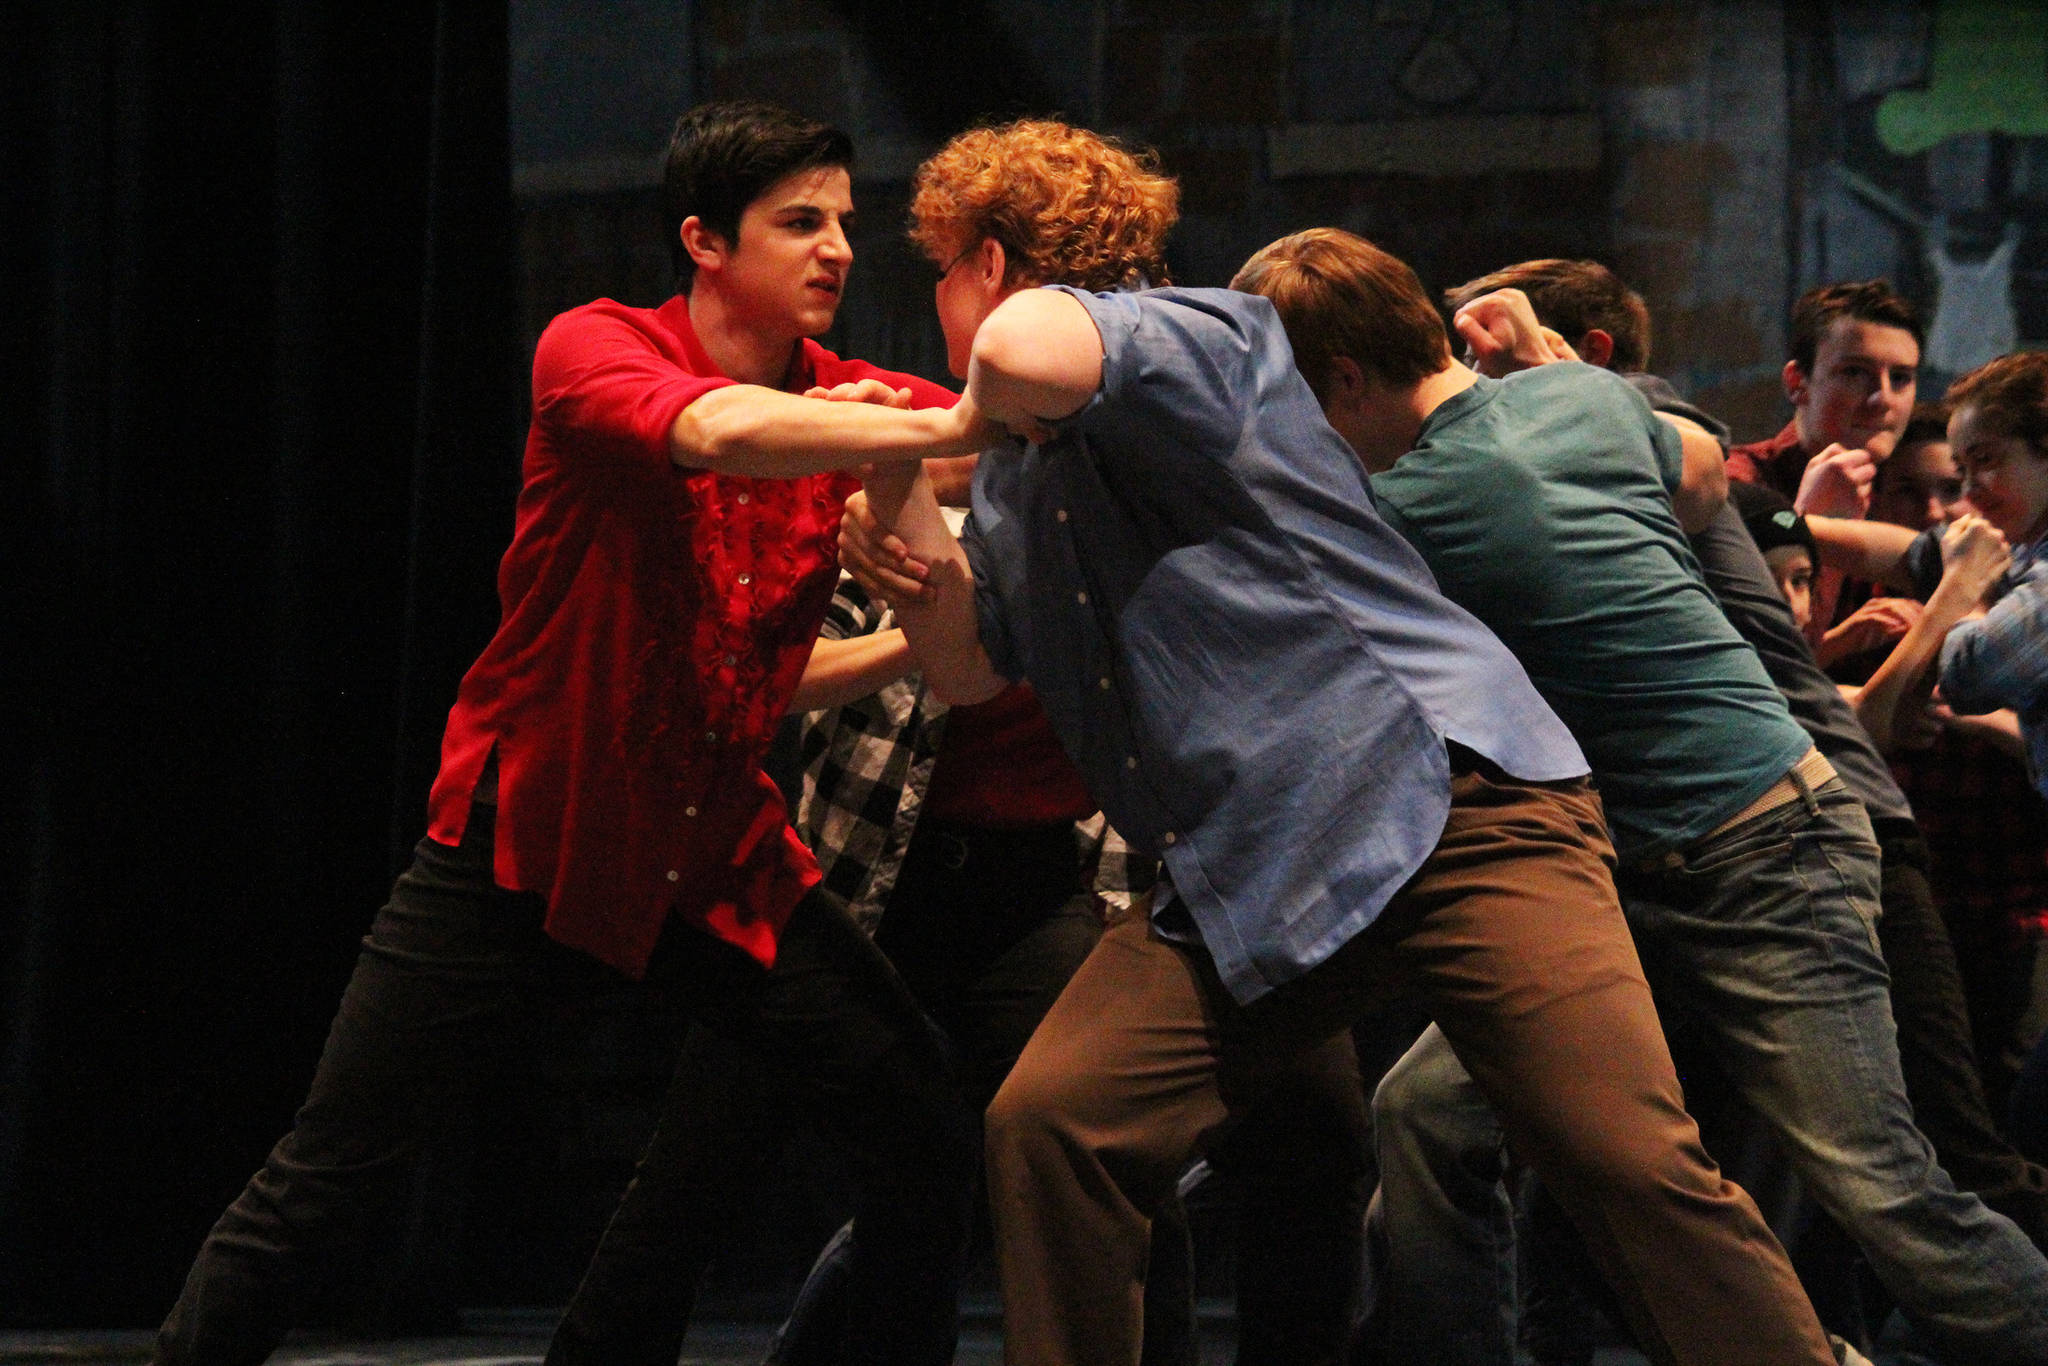 Homer High School students David Weisser (left) and Theodore Castellani (right) as the characters Bernardo and Riff, respectively act out a brawl scene from “West Side Story” during a dress rehearsal Tuesday, March 20, 2018 at the Mariner Theatre in Homer, Alaska. The musical is this year’s production for the school’s Concert Choir class, and and was last performed by the high school 15 years ago. (Photo by Megan Pacer/Homer News)